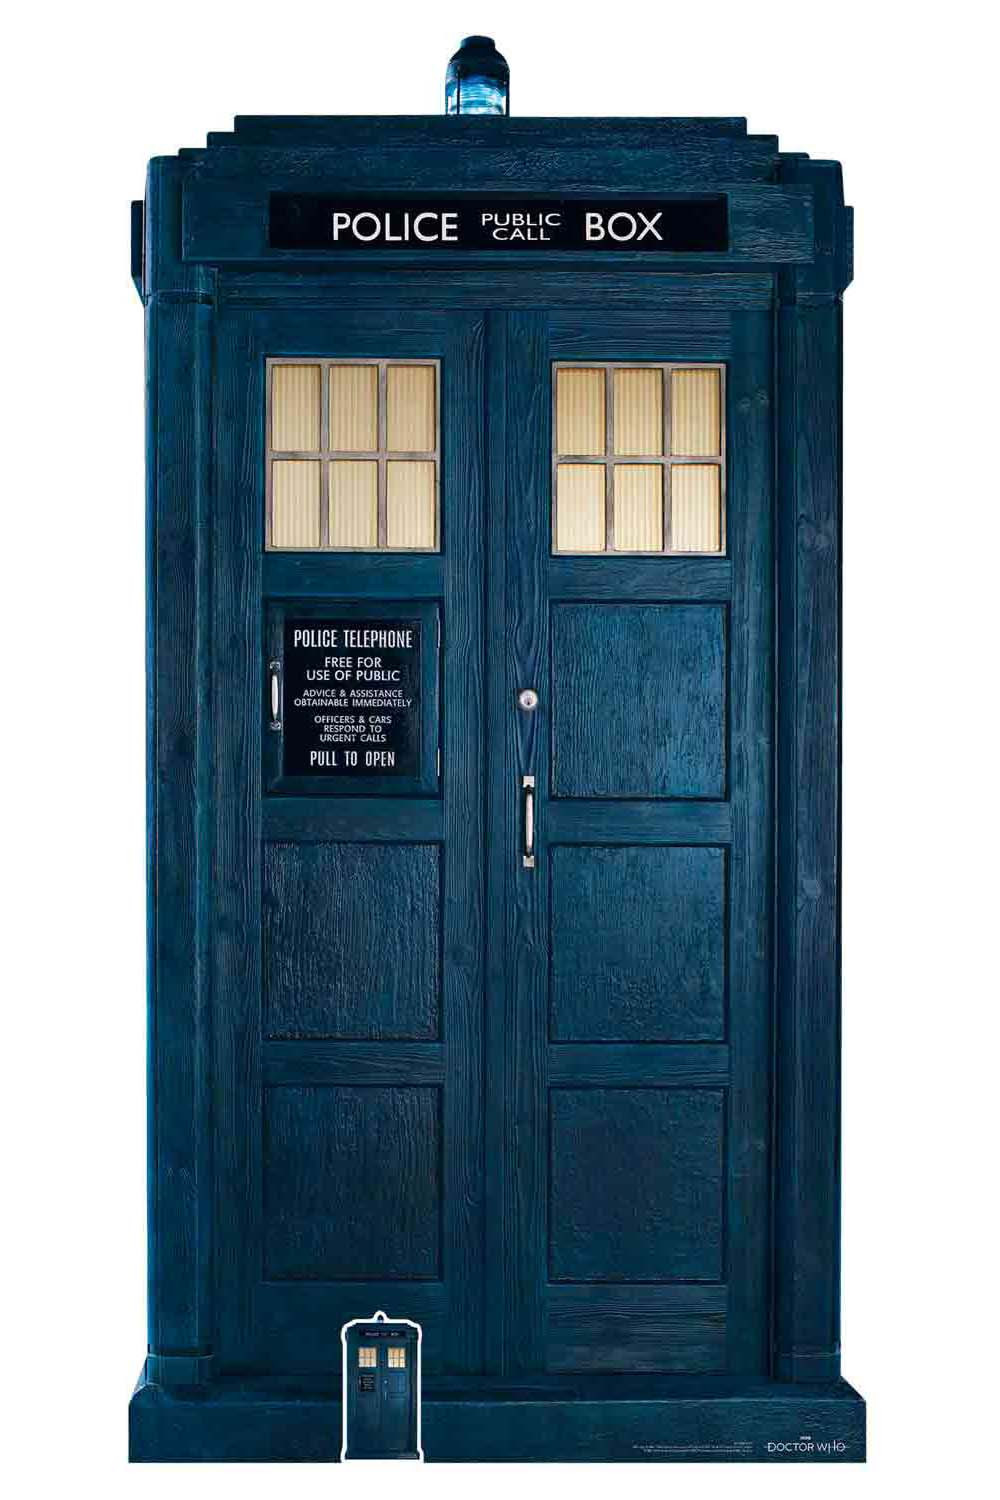 https://cdn11.bigcommerce.com/s-ydriczk/images/stencil/1500x1500/products/88693/92070/13th-Doctor-Tardis-Official-2-3-rds-Lifesize-Cardboard-Cutout-and-mini-buy-now-at-starstills__63836.1582849658.jpg?c=2